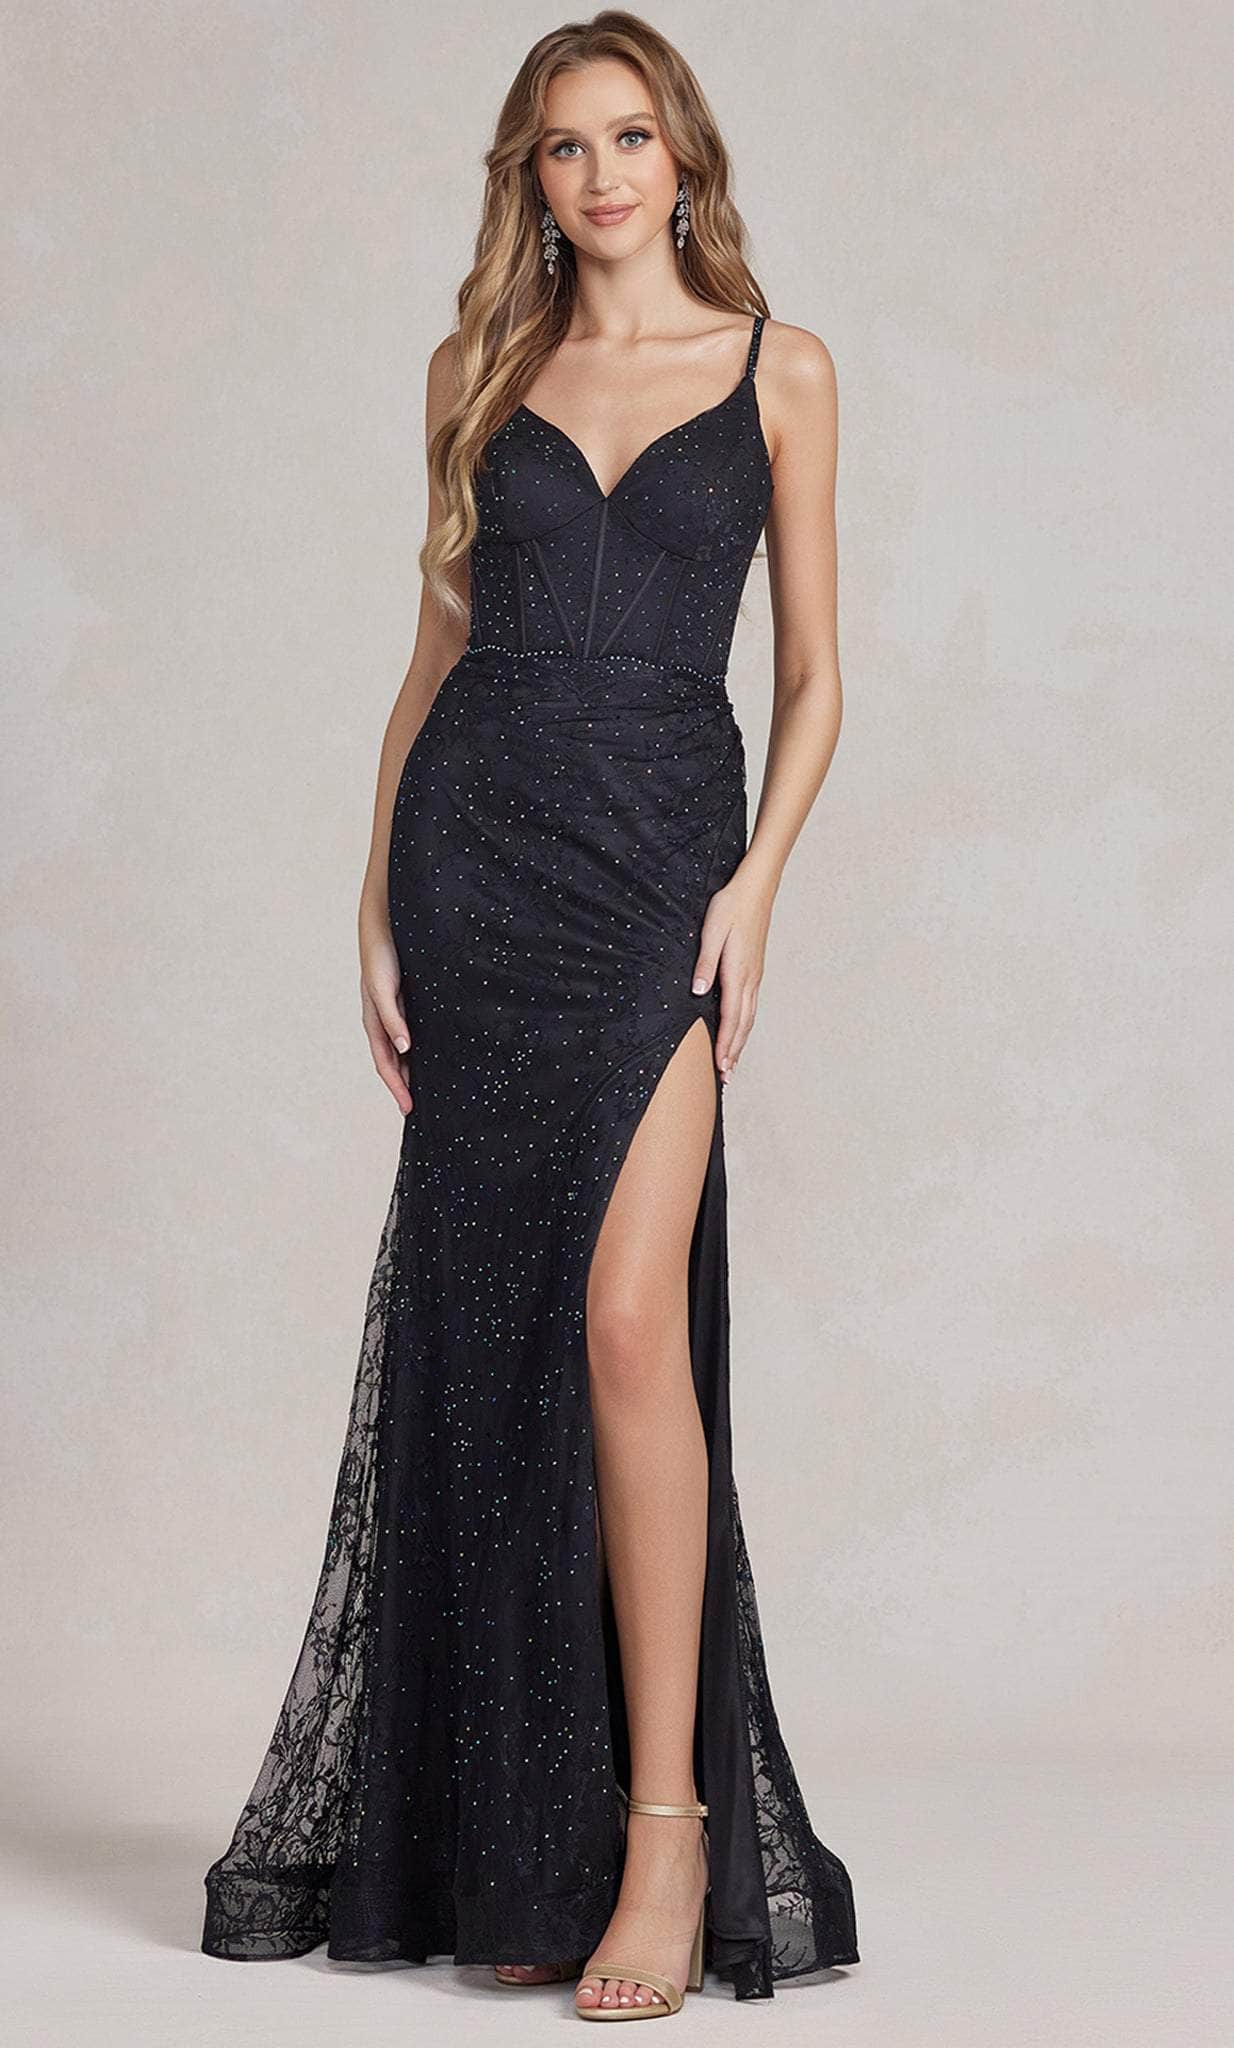 Image of Nox Anabel B1145 - Beaded Lace Prom Dress